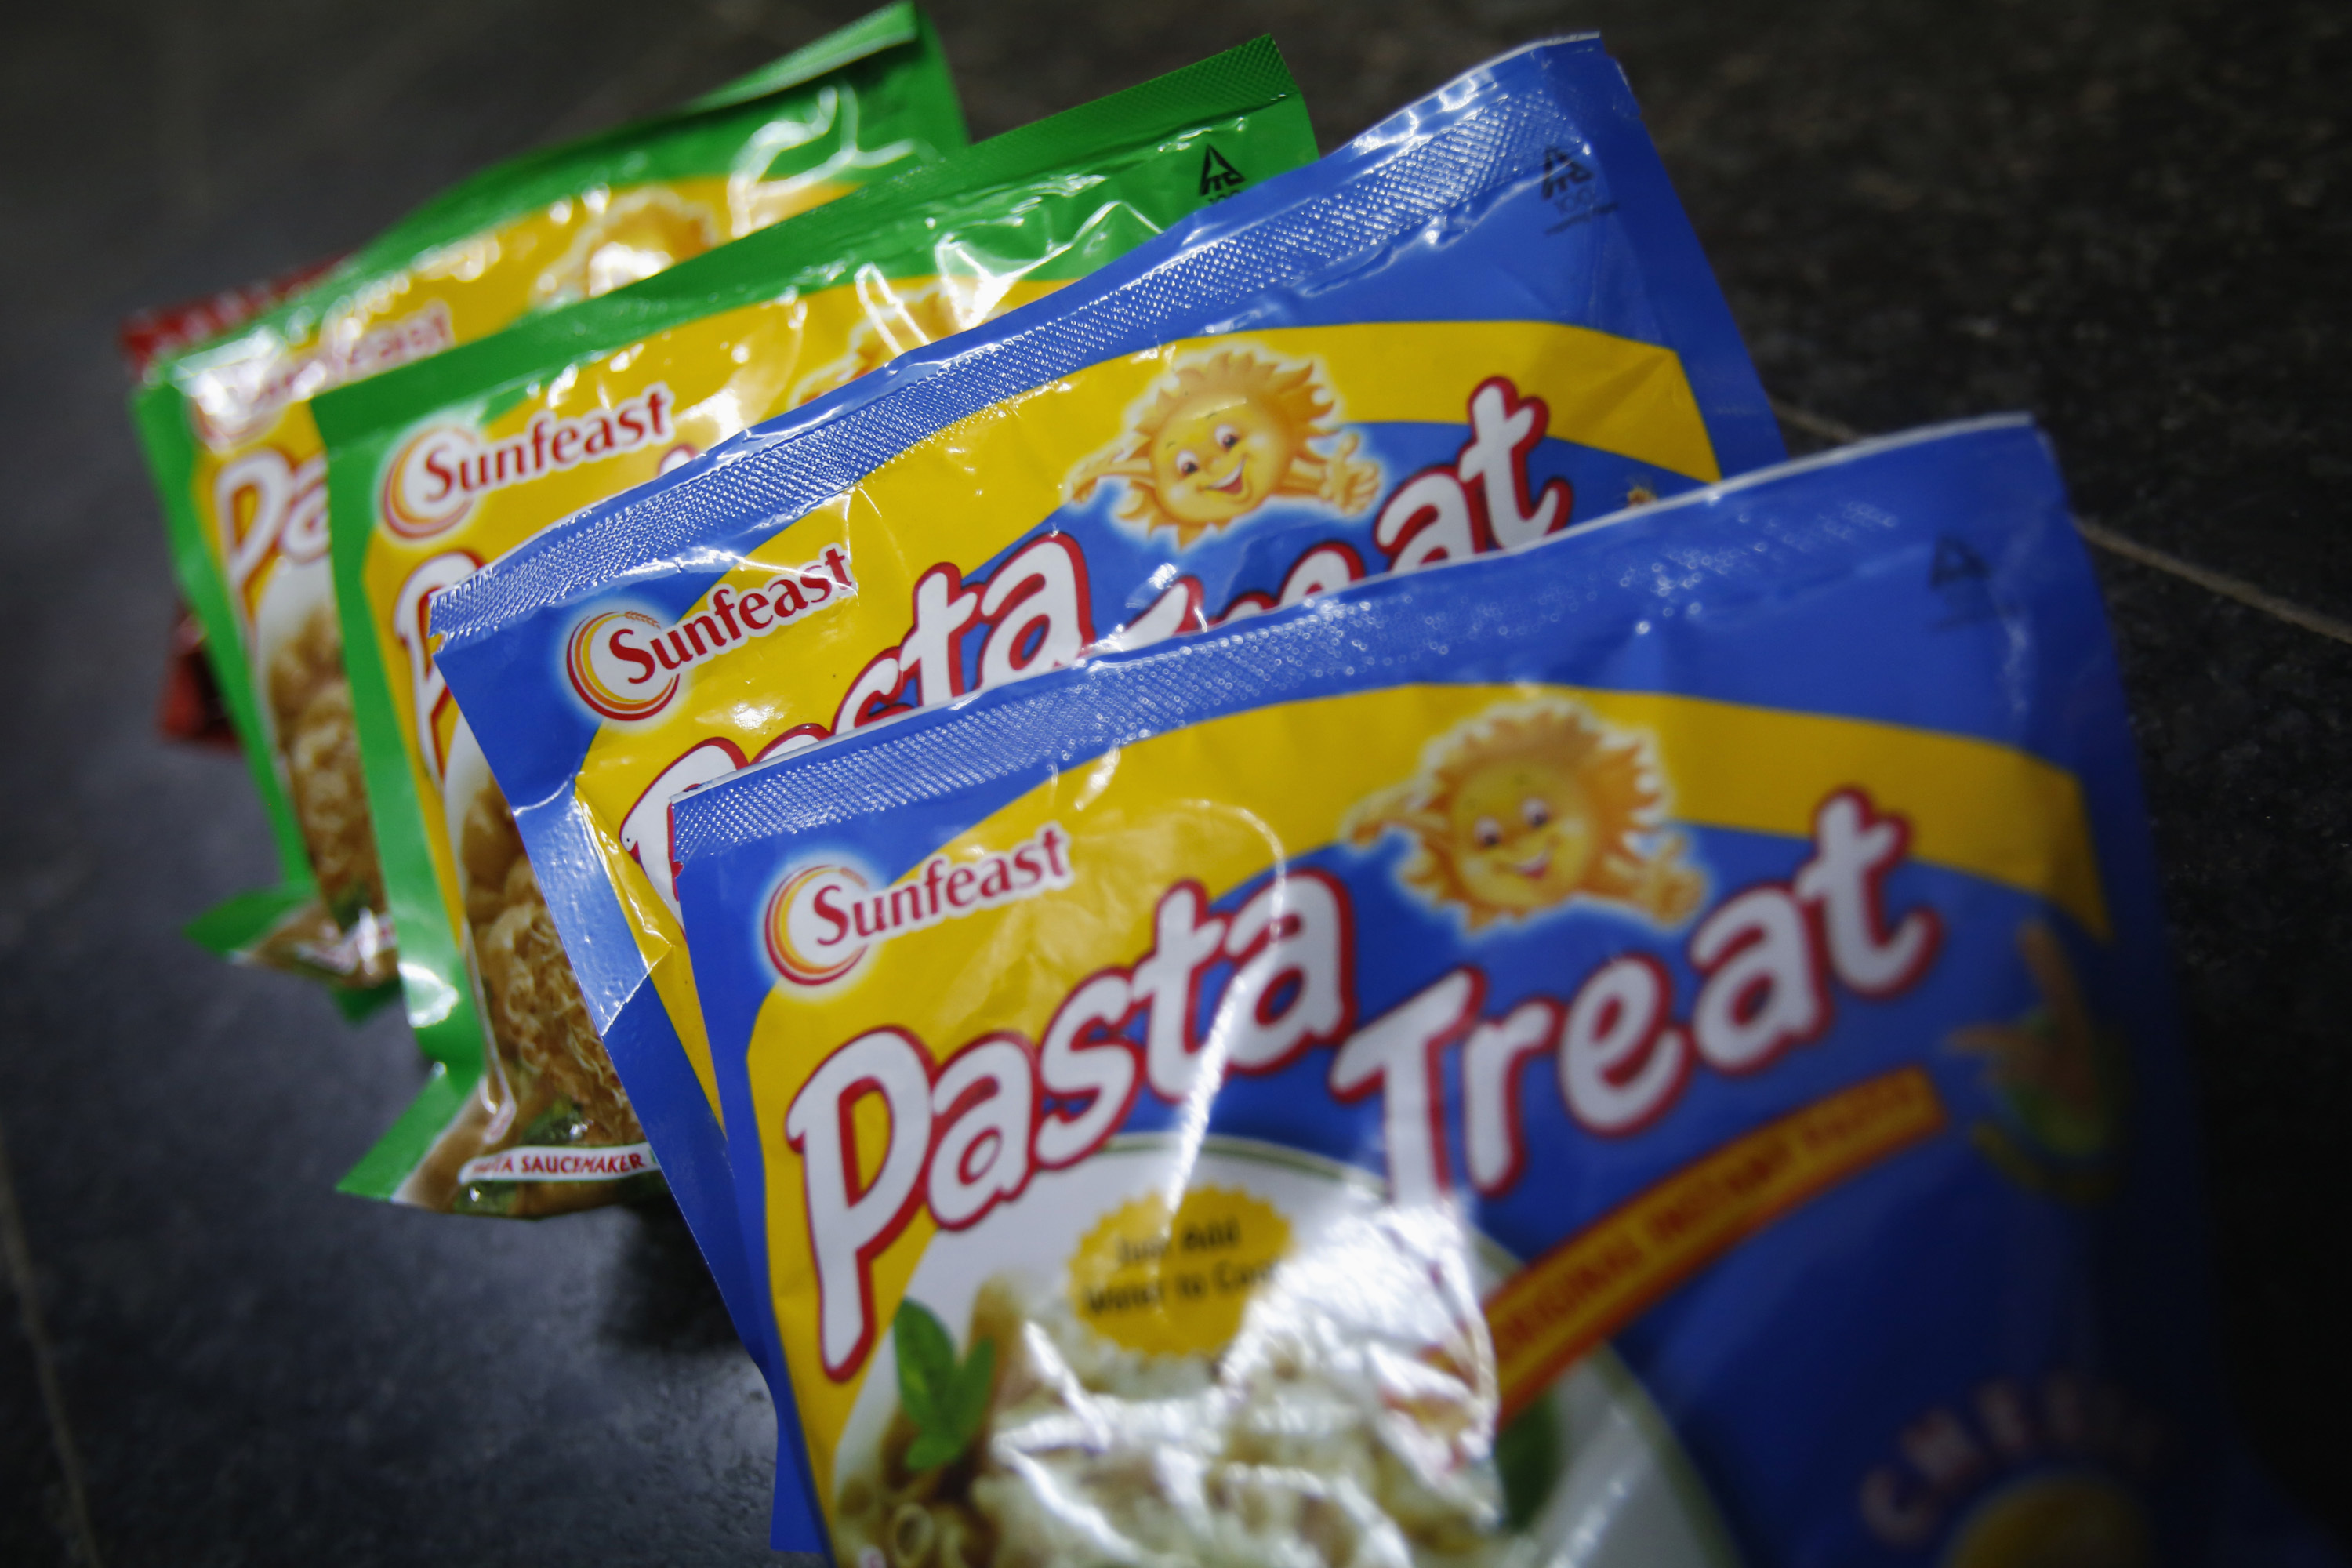 Sunfeast-branded instant past meals, which are part of a line of fast-moving consumer goods owned by Indian cigarette maker ITC, are displayed for sale at a grocery store in Mumbai